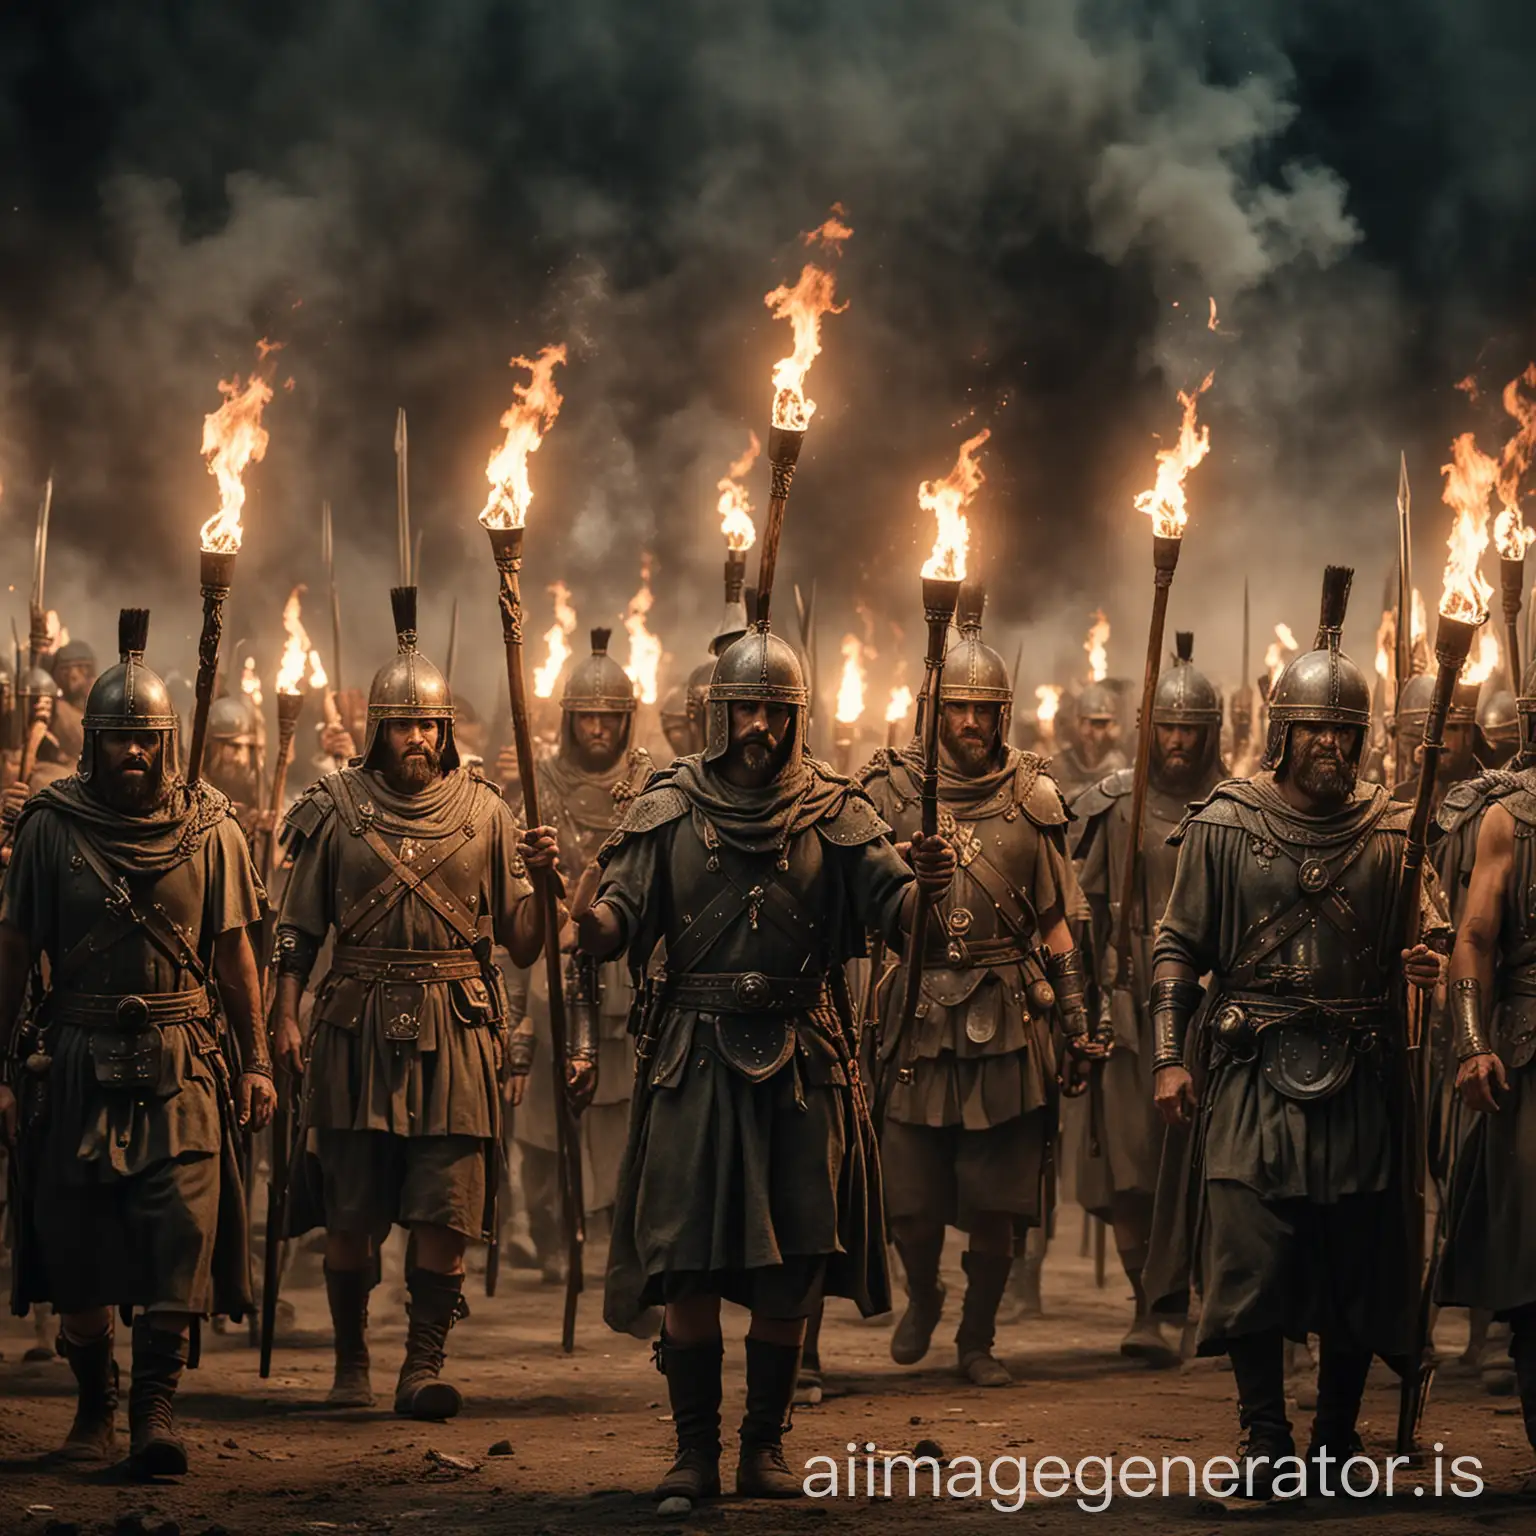 Ancient-Army-Holding-Torches-Historical-Warriors-Illuminating-the-Night